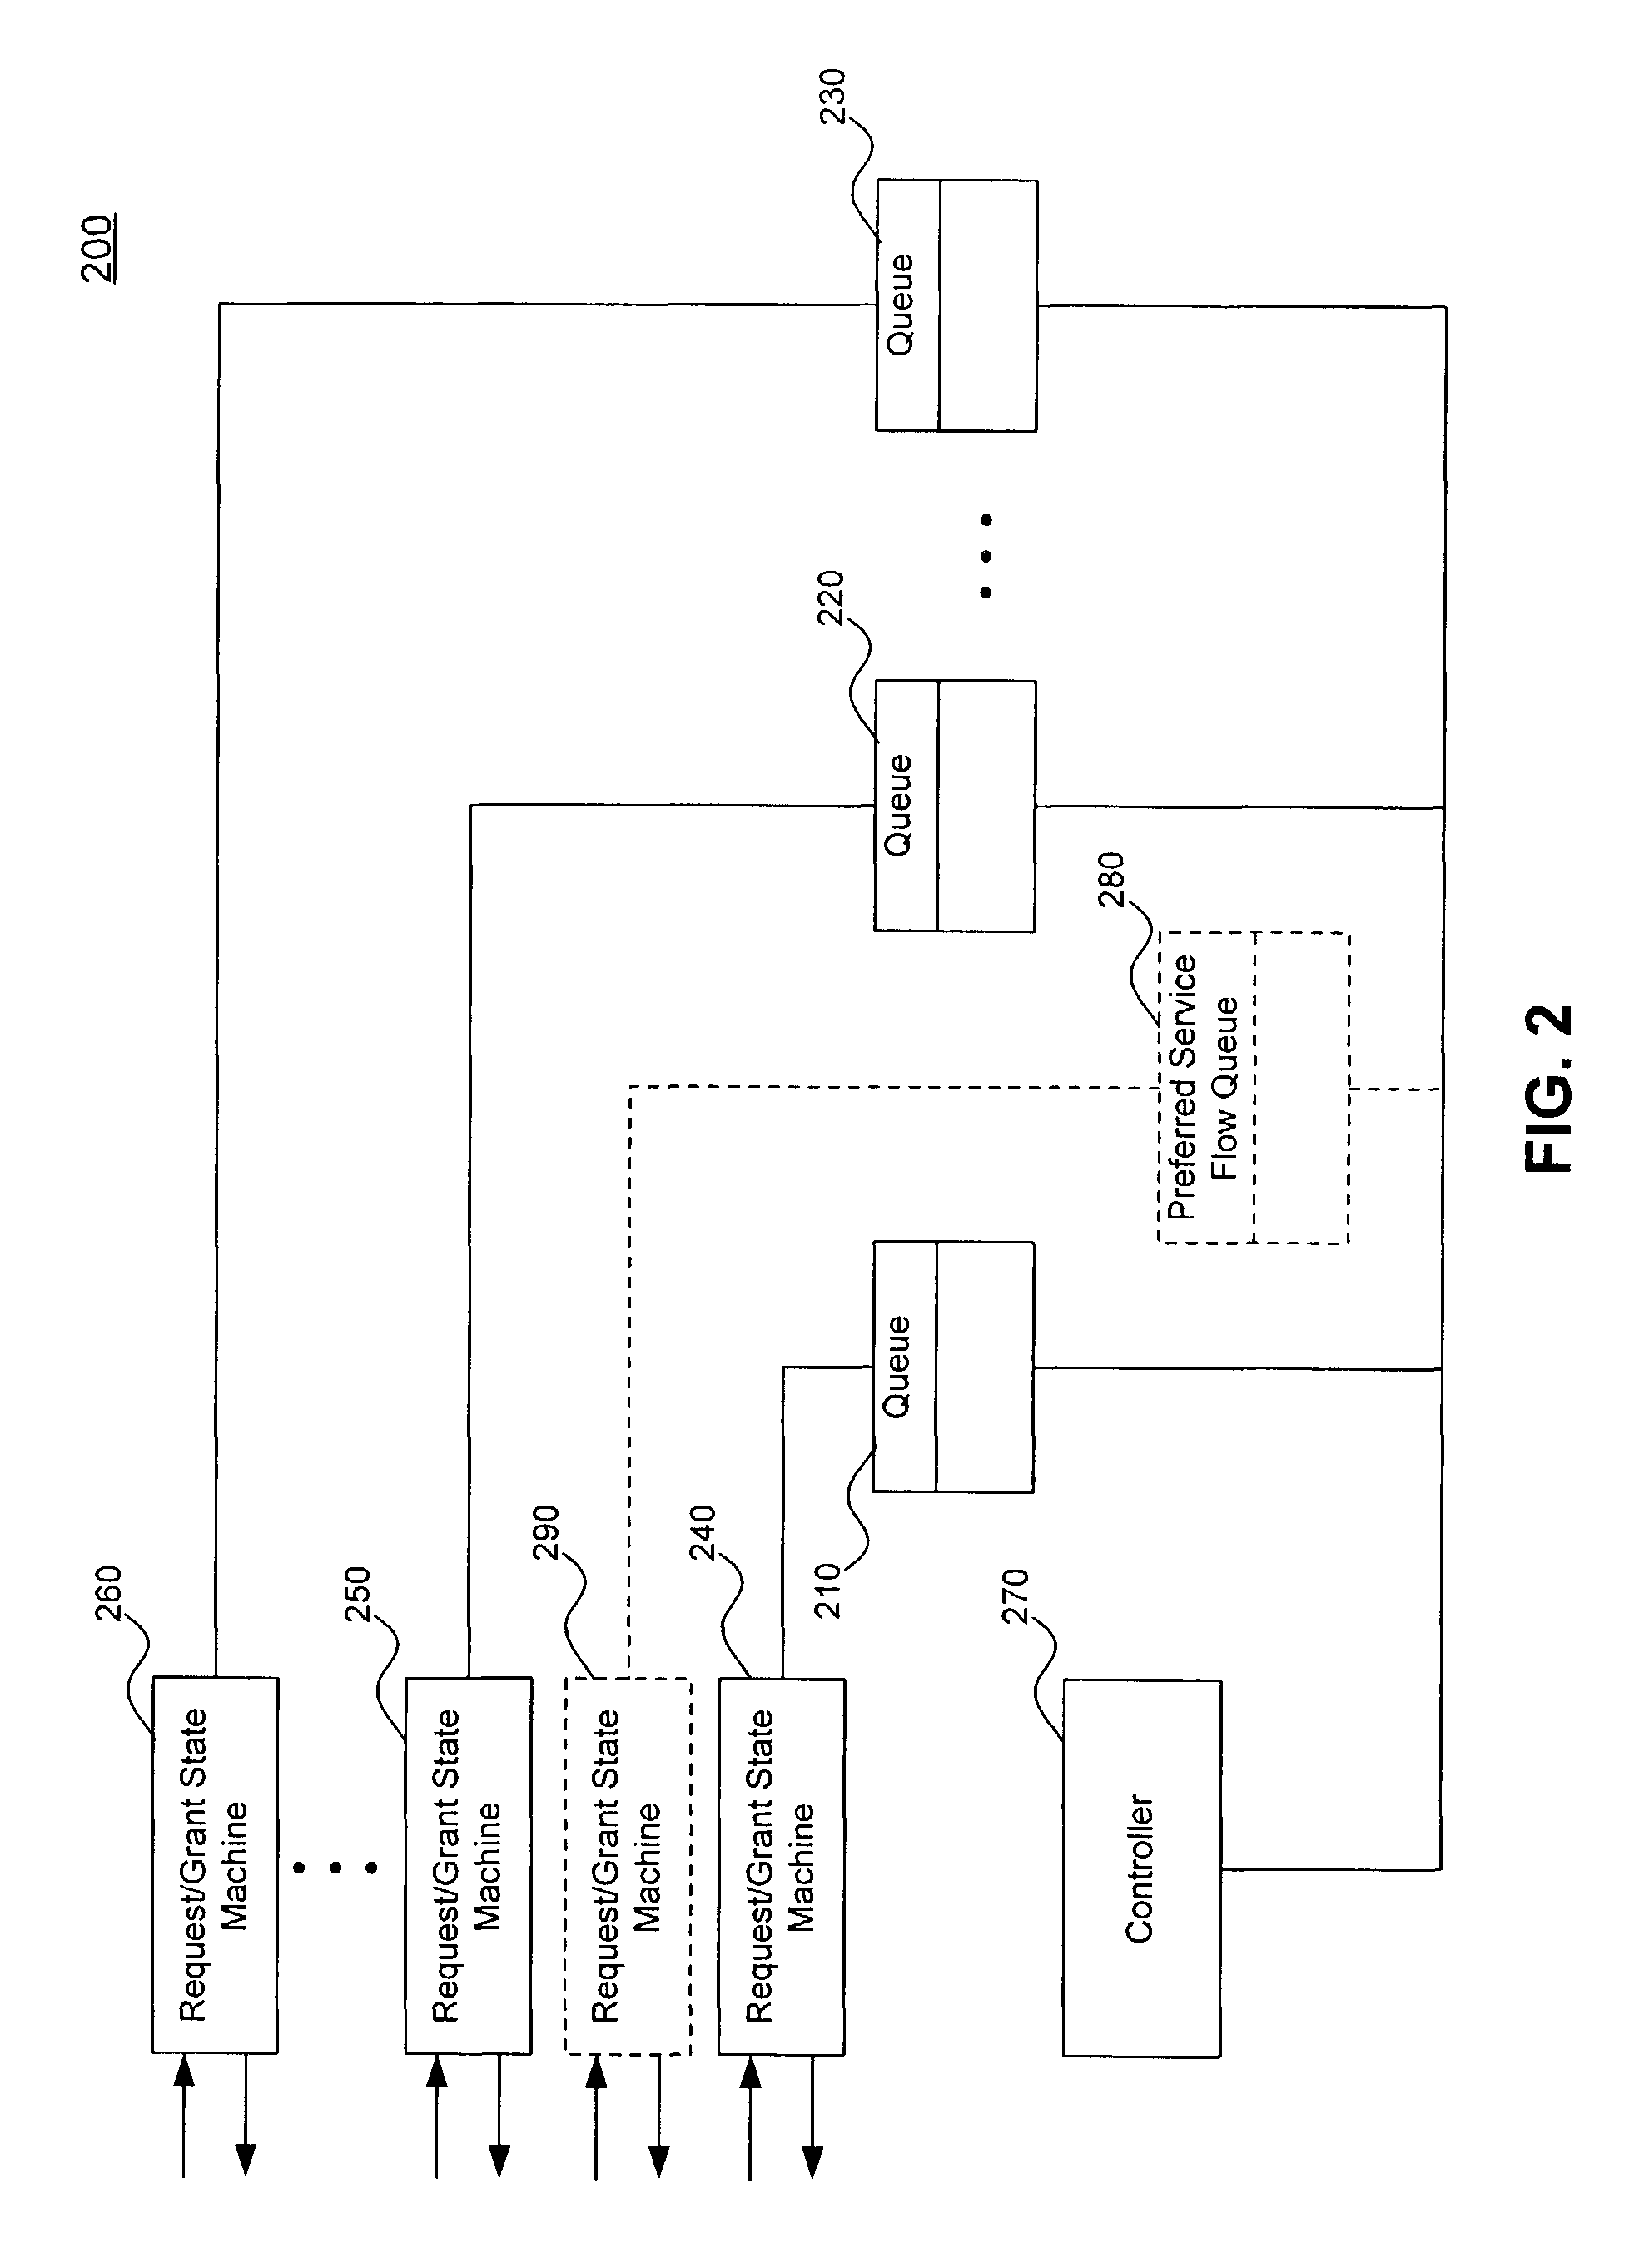 System and method for preferred service flow of high priority messages